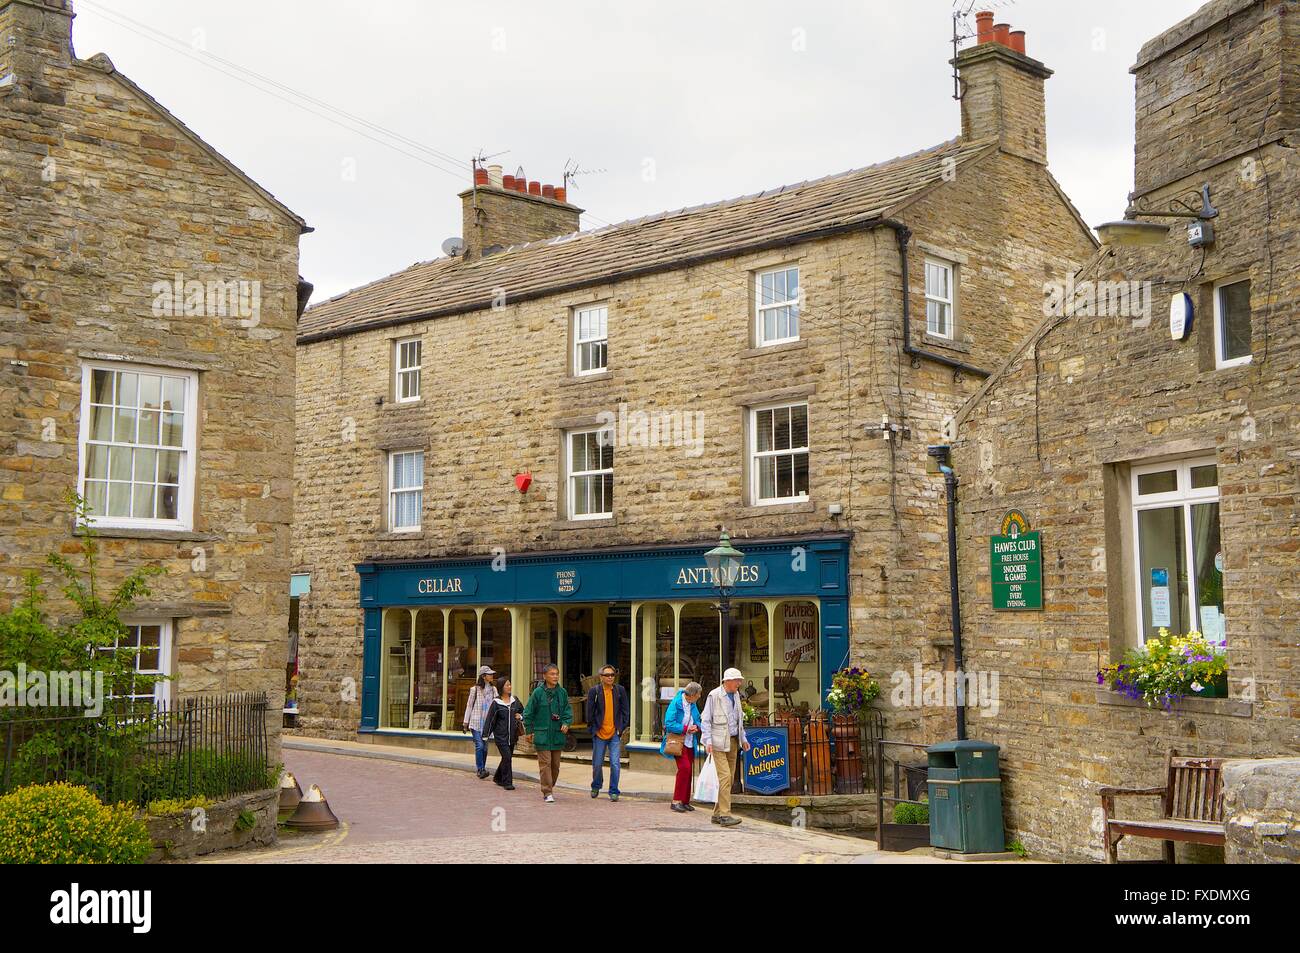 Japanese tourists walking past antiques shop in the Main Street. Hawes, Wensleydale, Yorkshire Dales National Park, Yorkshire. Stock Photo